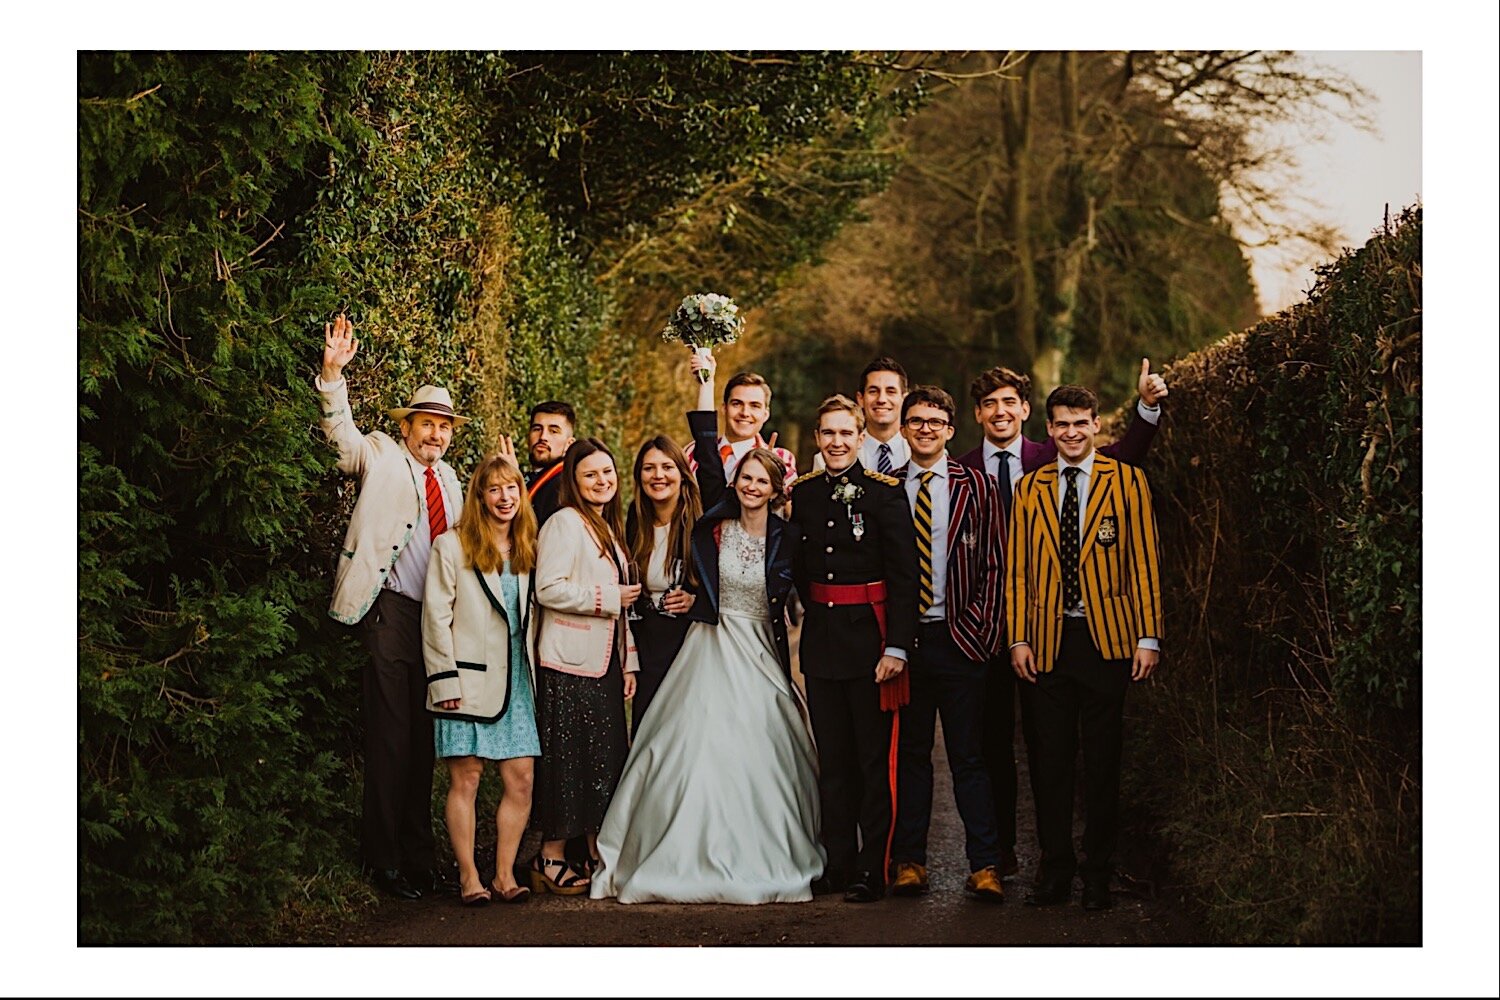 074_TWS-822_bride_church_blazers__photography_rowing_henley_oxfordshire_millitary_ceremony_styling_setting_group_table_crooked_wedding_friends_groom_winter_billet.jpg